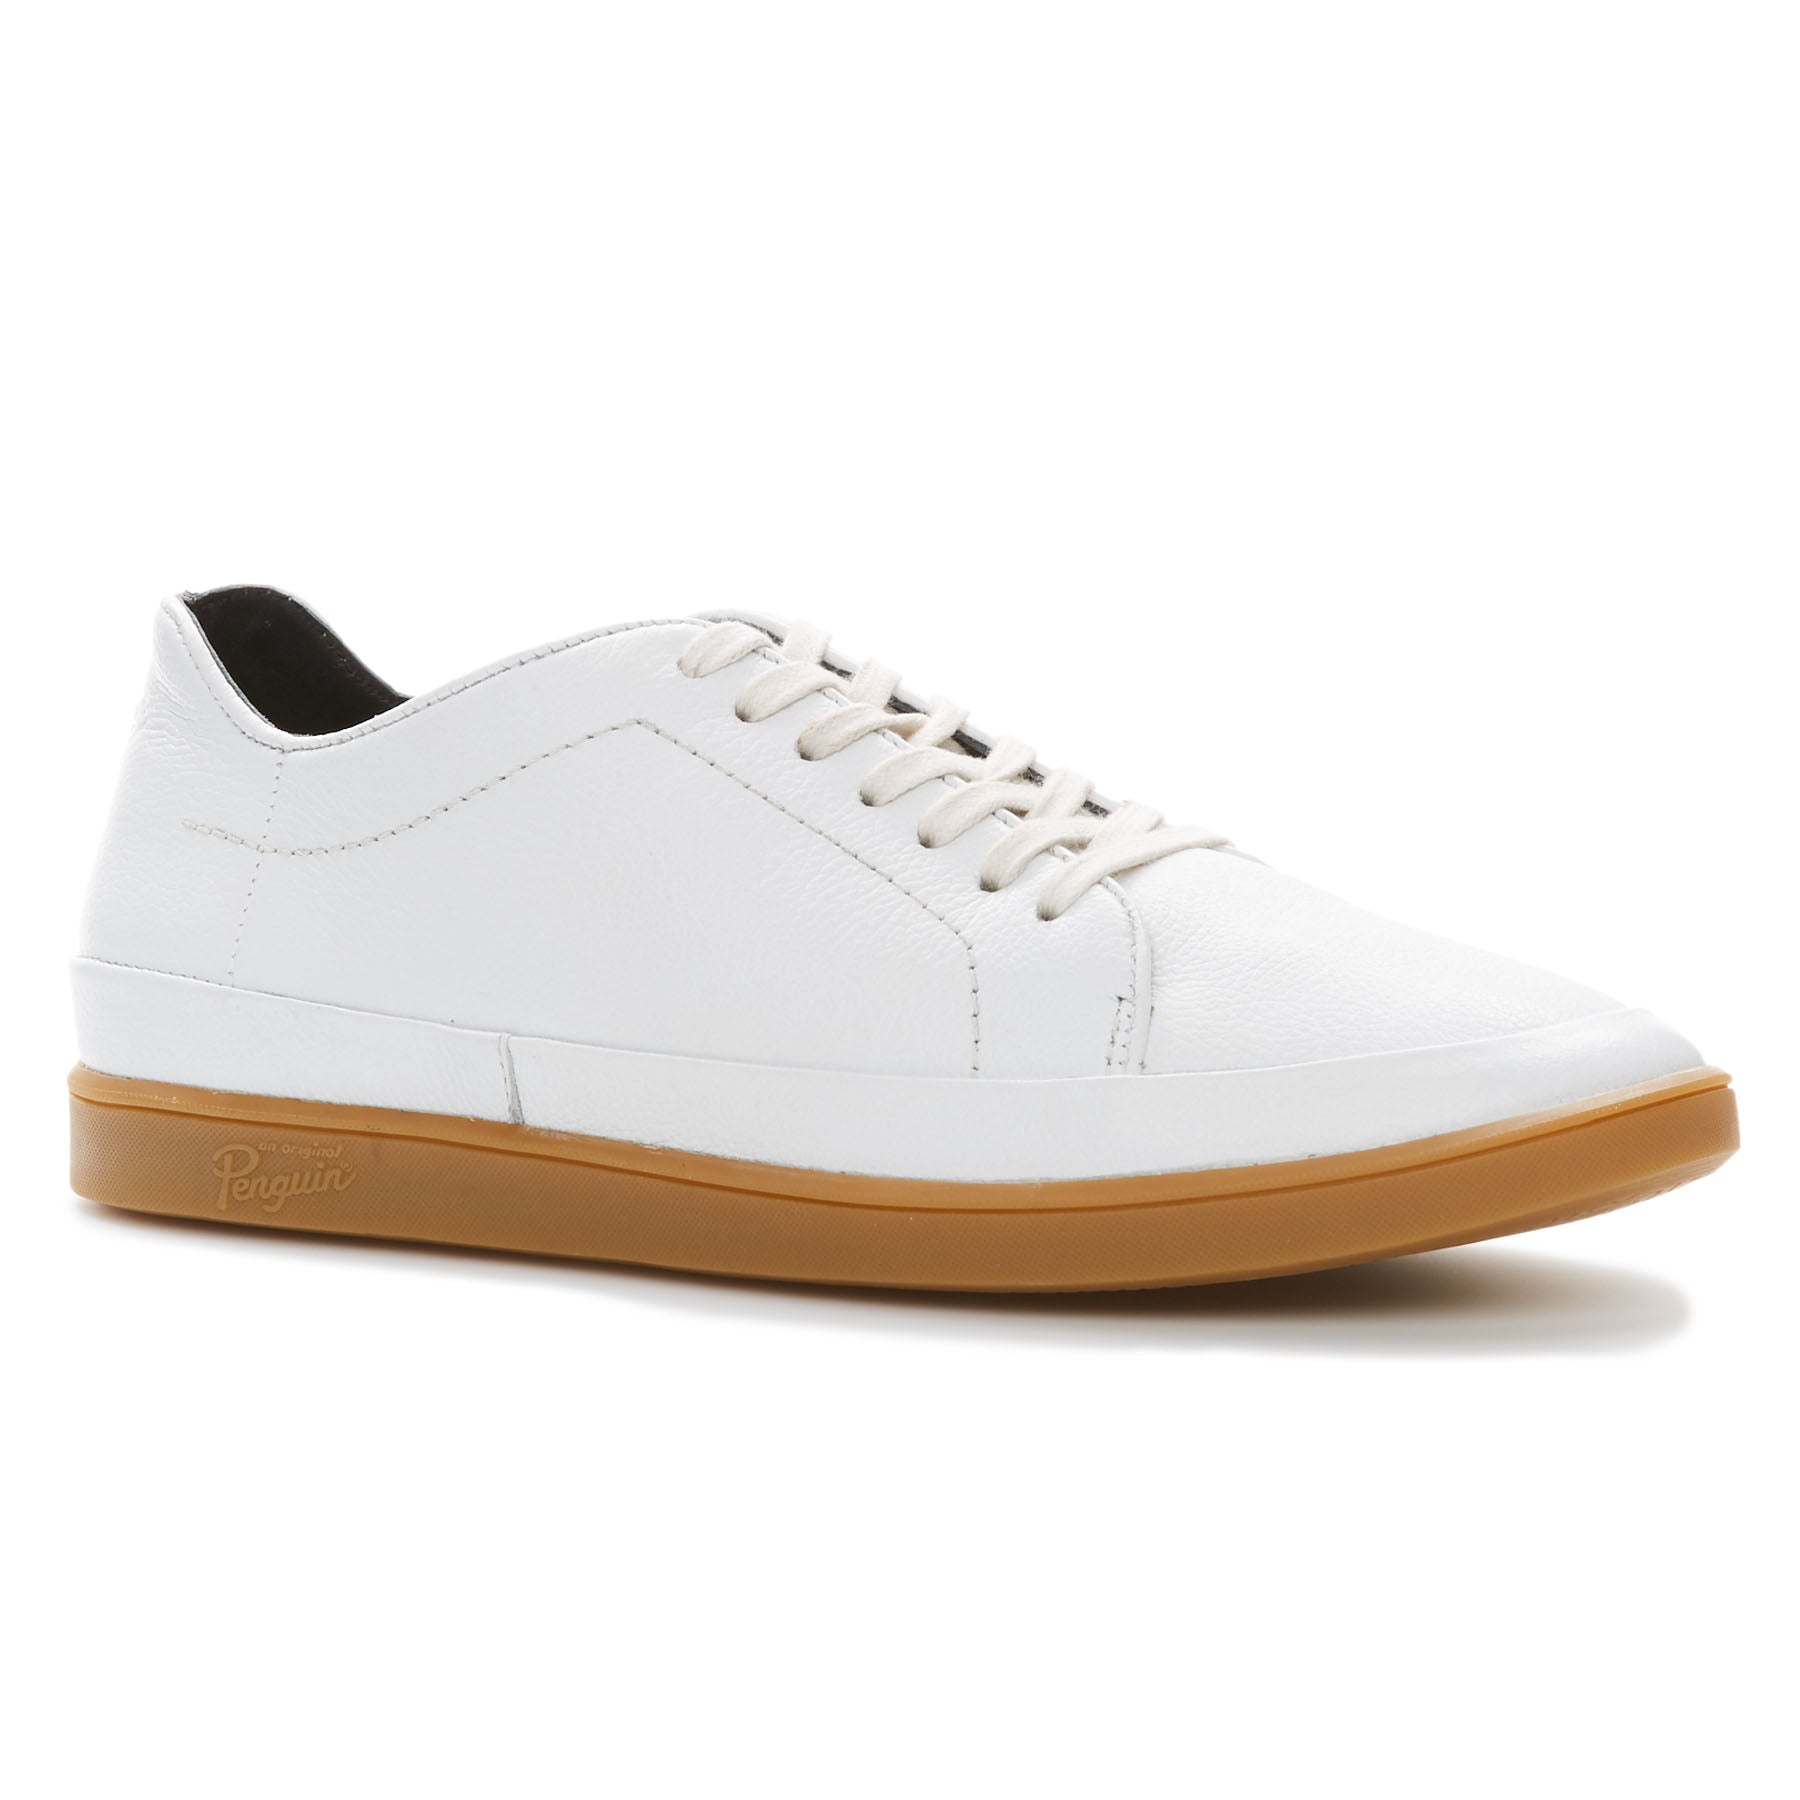 View Luper Sneaker In White information